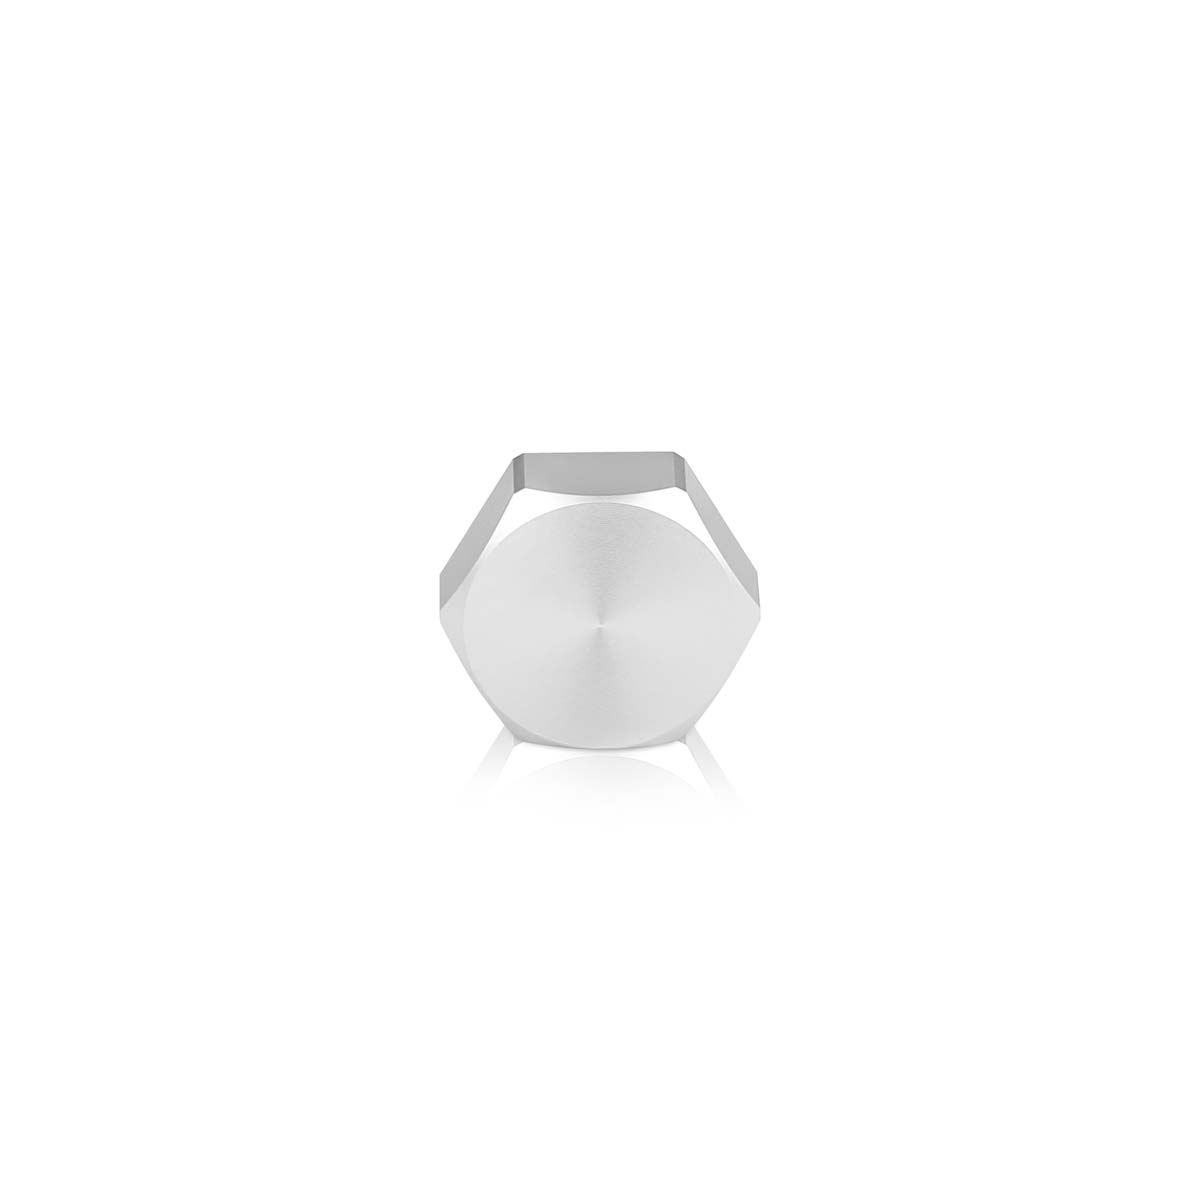 5/16-18 Threaded Hex 1'' Caps, Height: 3/8'', Clear Anodized Aluminum [Required Material Hole Size: 3/8'']